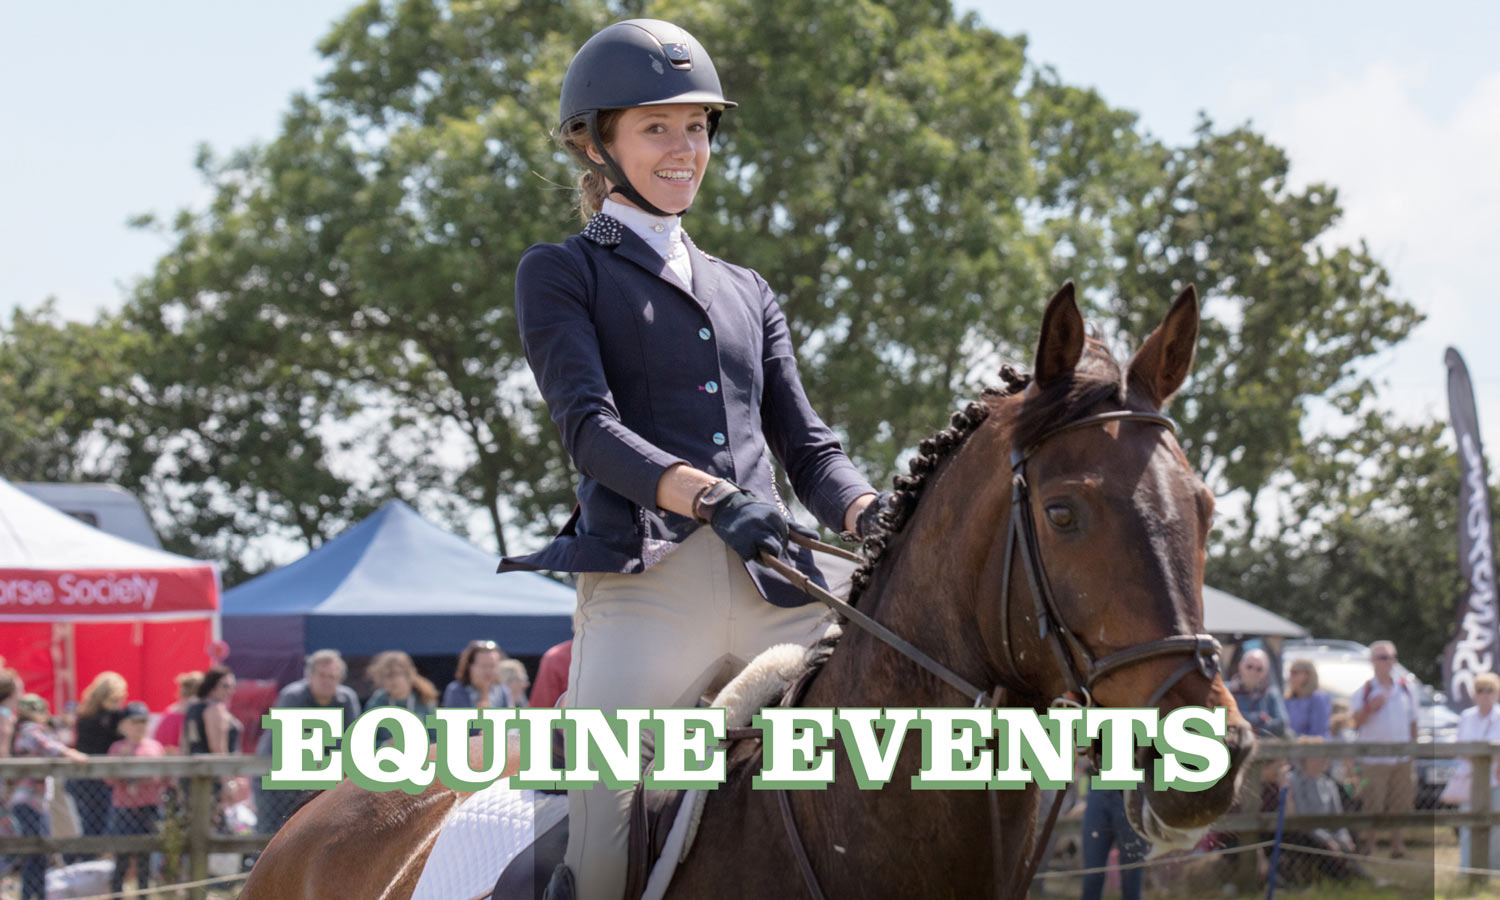 Equine events